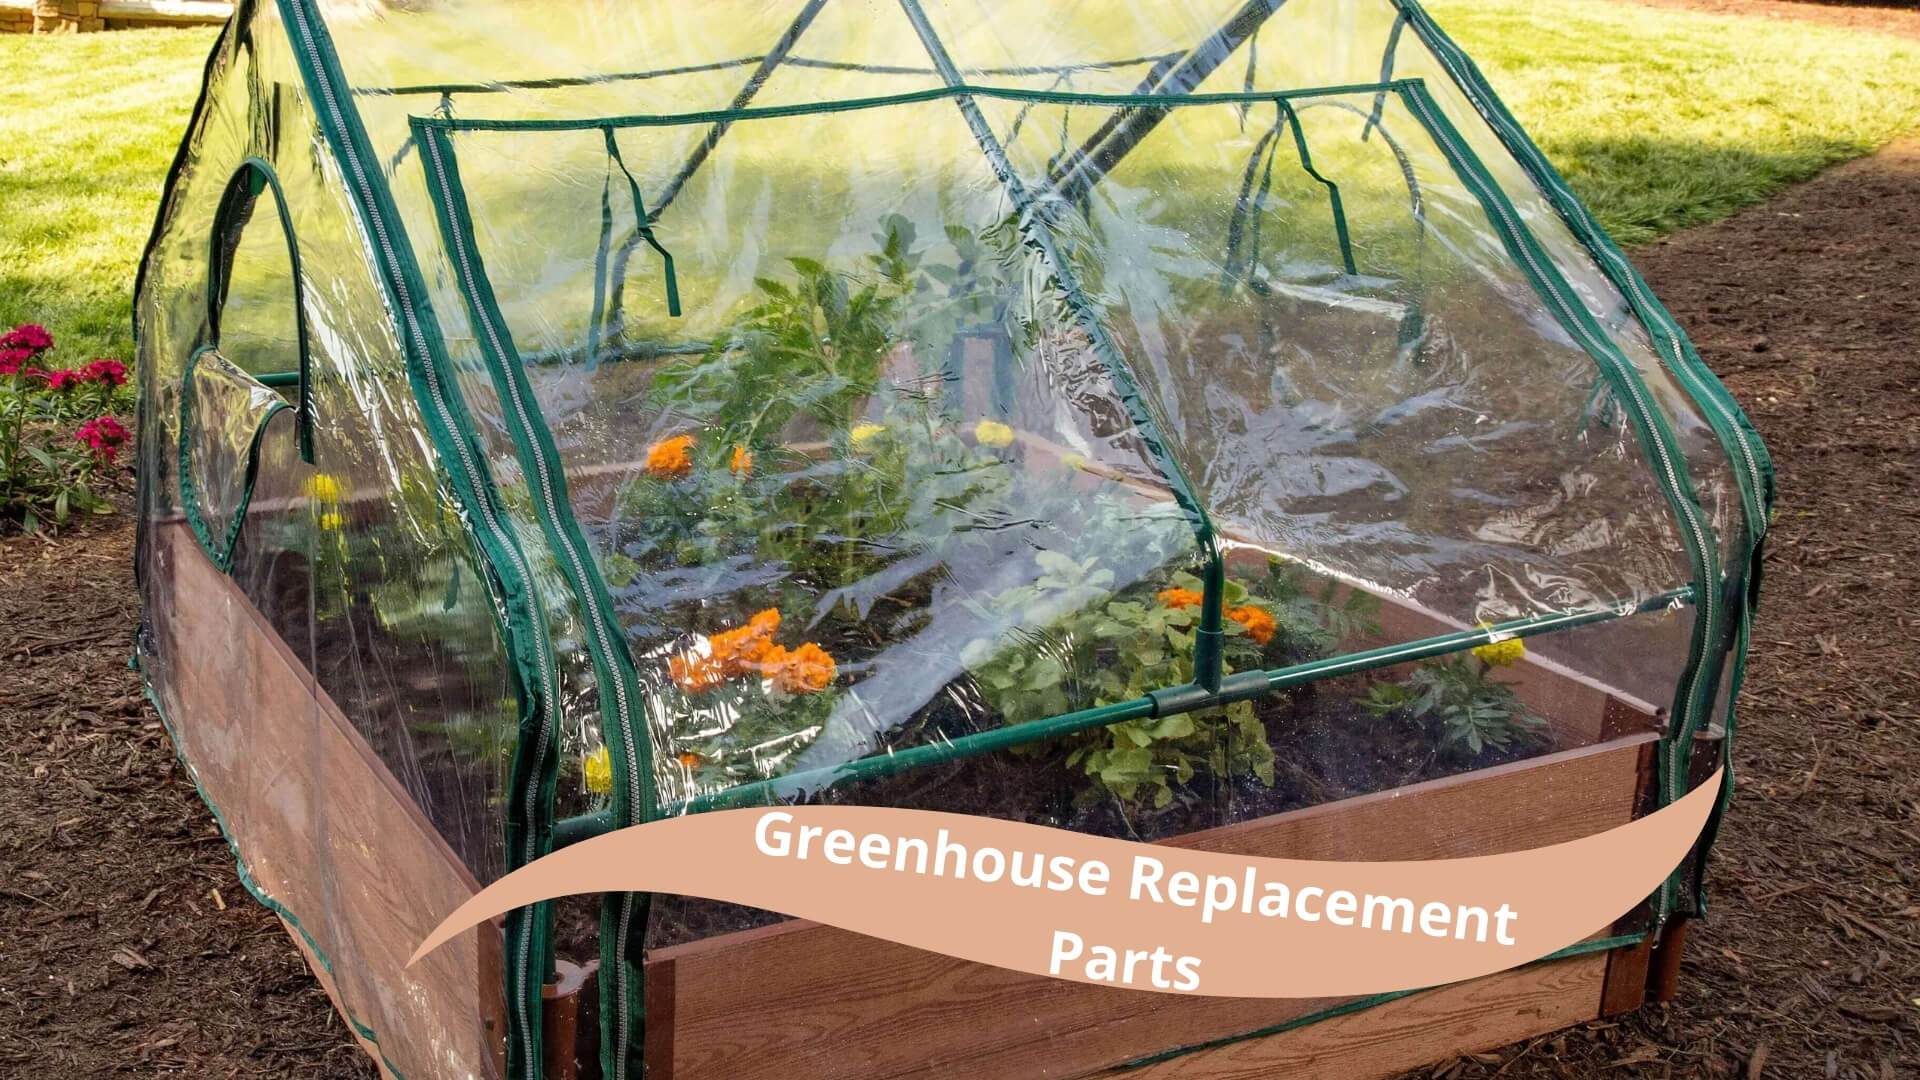 REPLACEMENT PARTS for: Extendable Cold Frame Greenhouse - 4' x 4' Kit